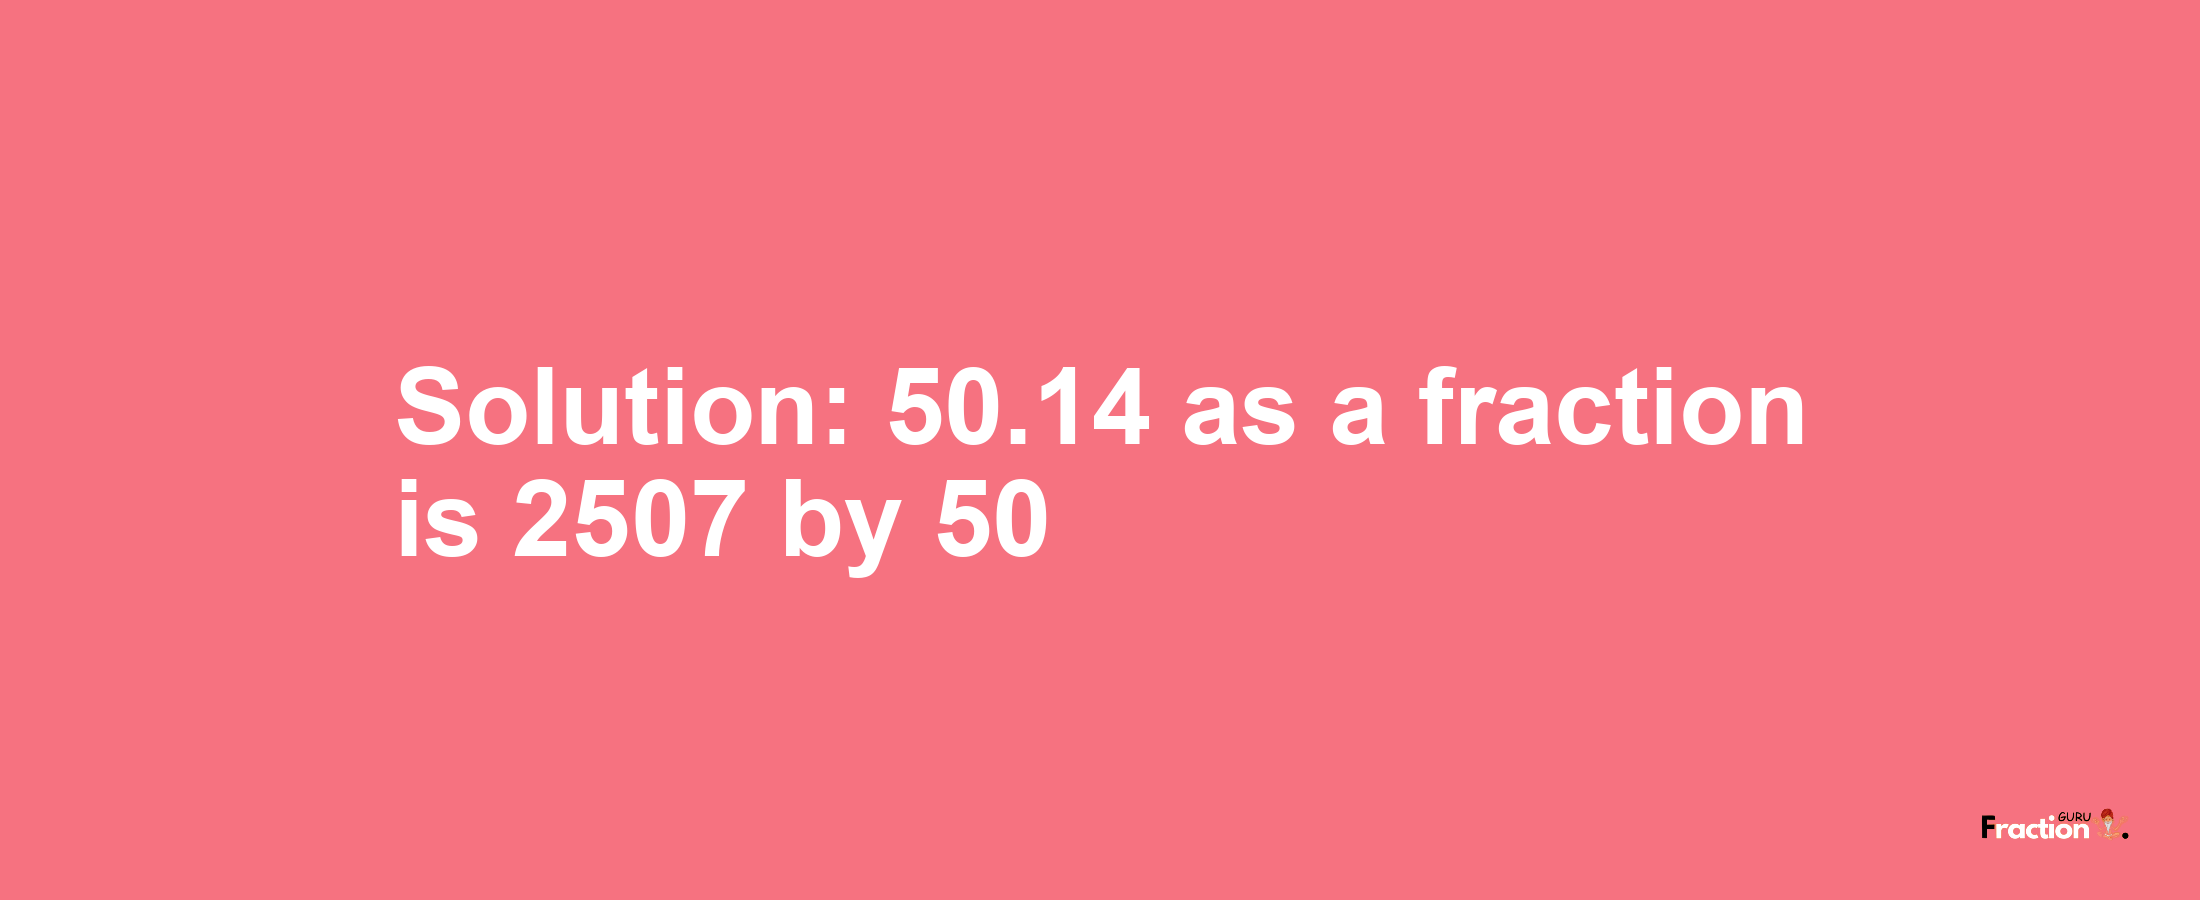 Solution:50.14 as a fraction is 2507/50